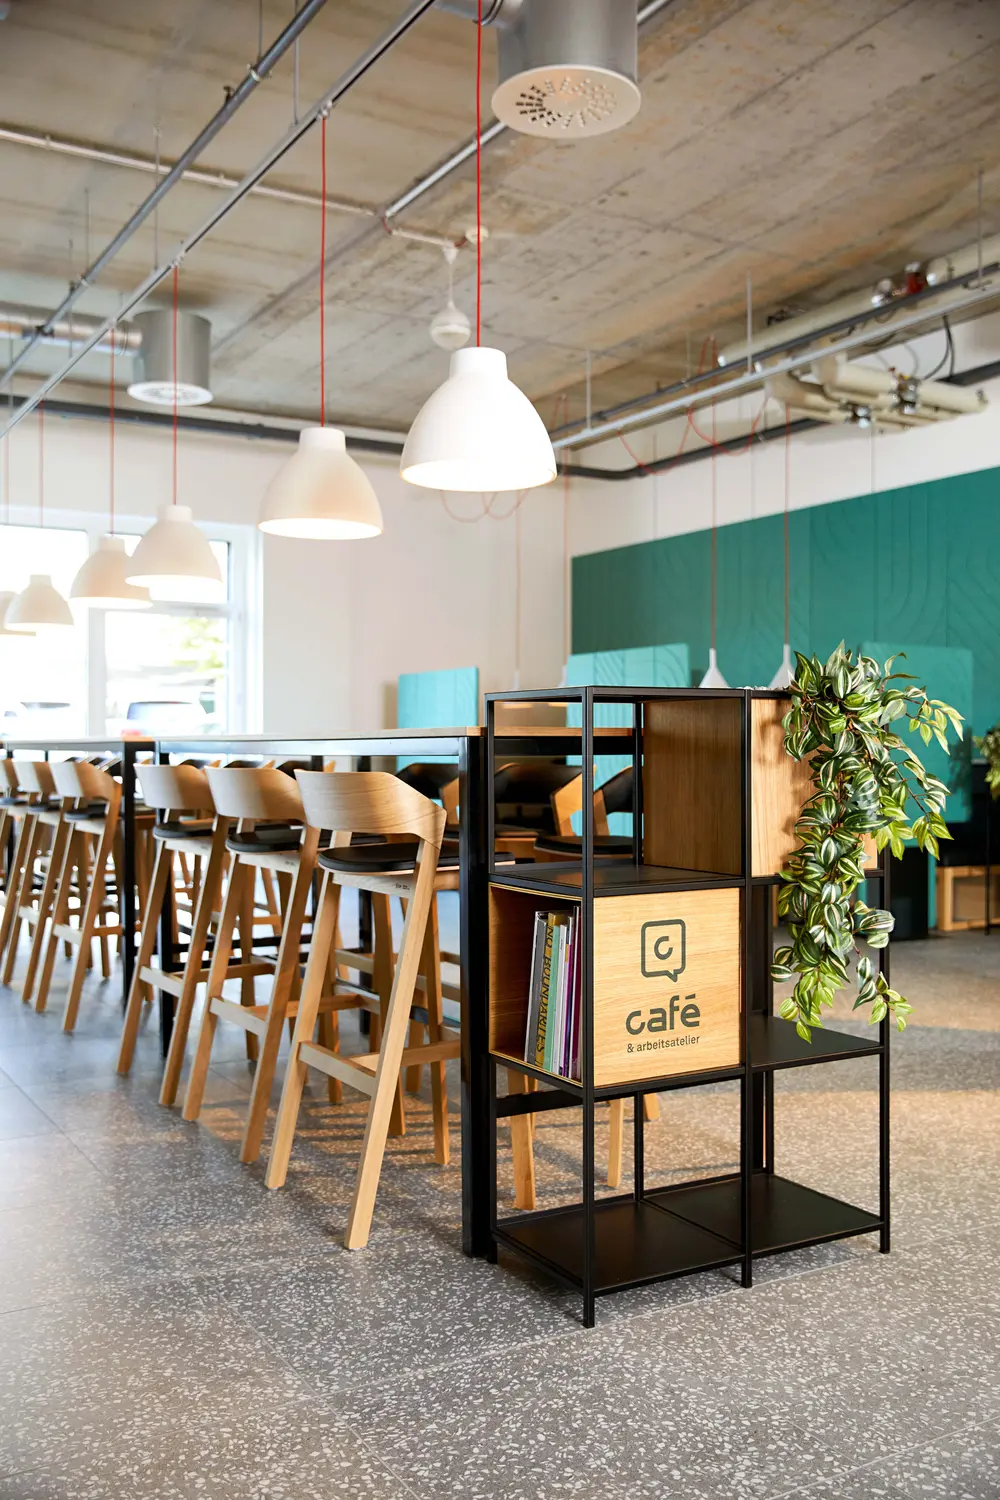 Modern cafe interior with hanging lights and wooden chairs.